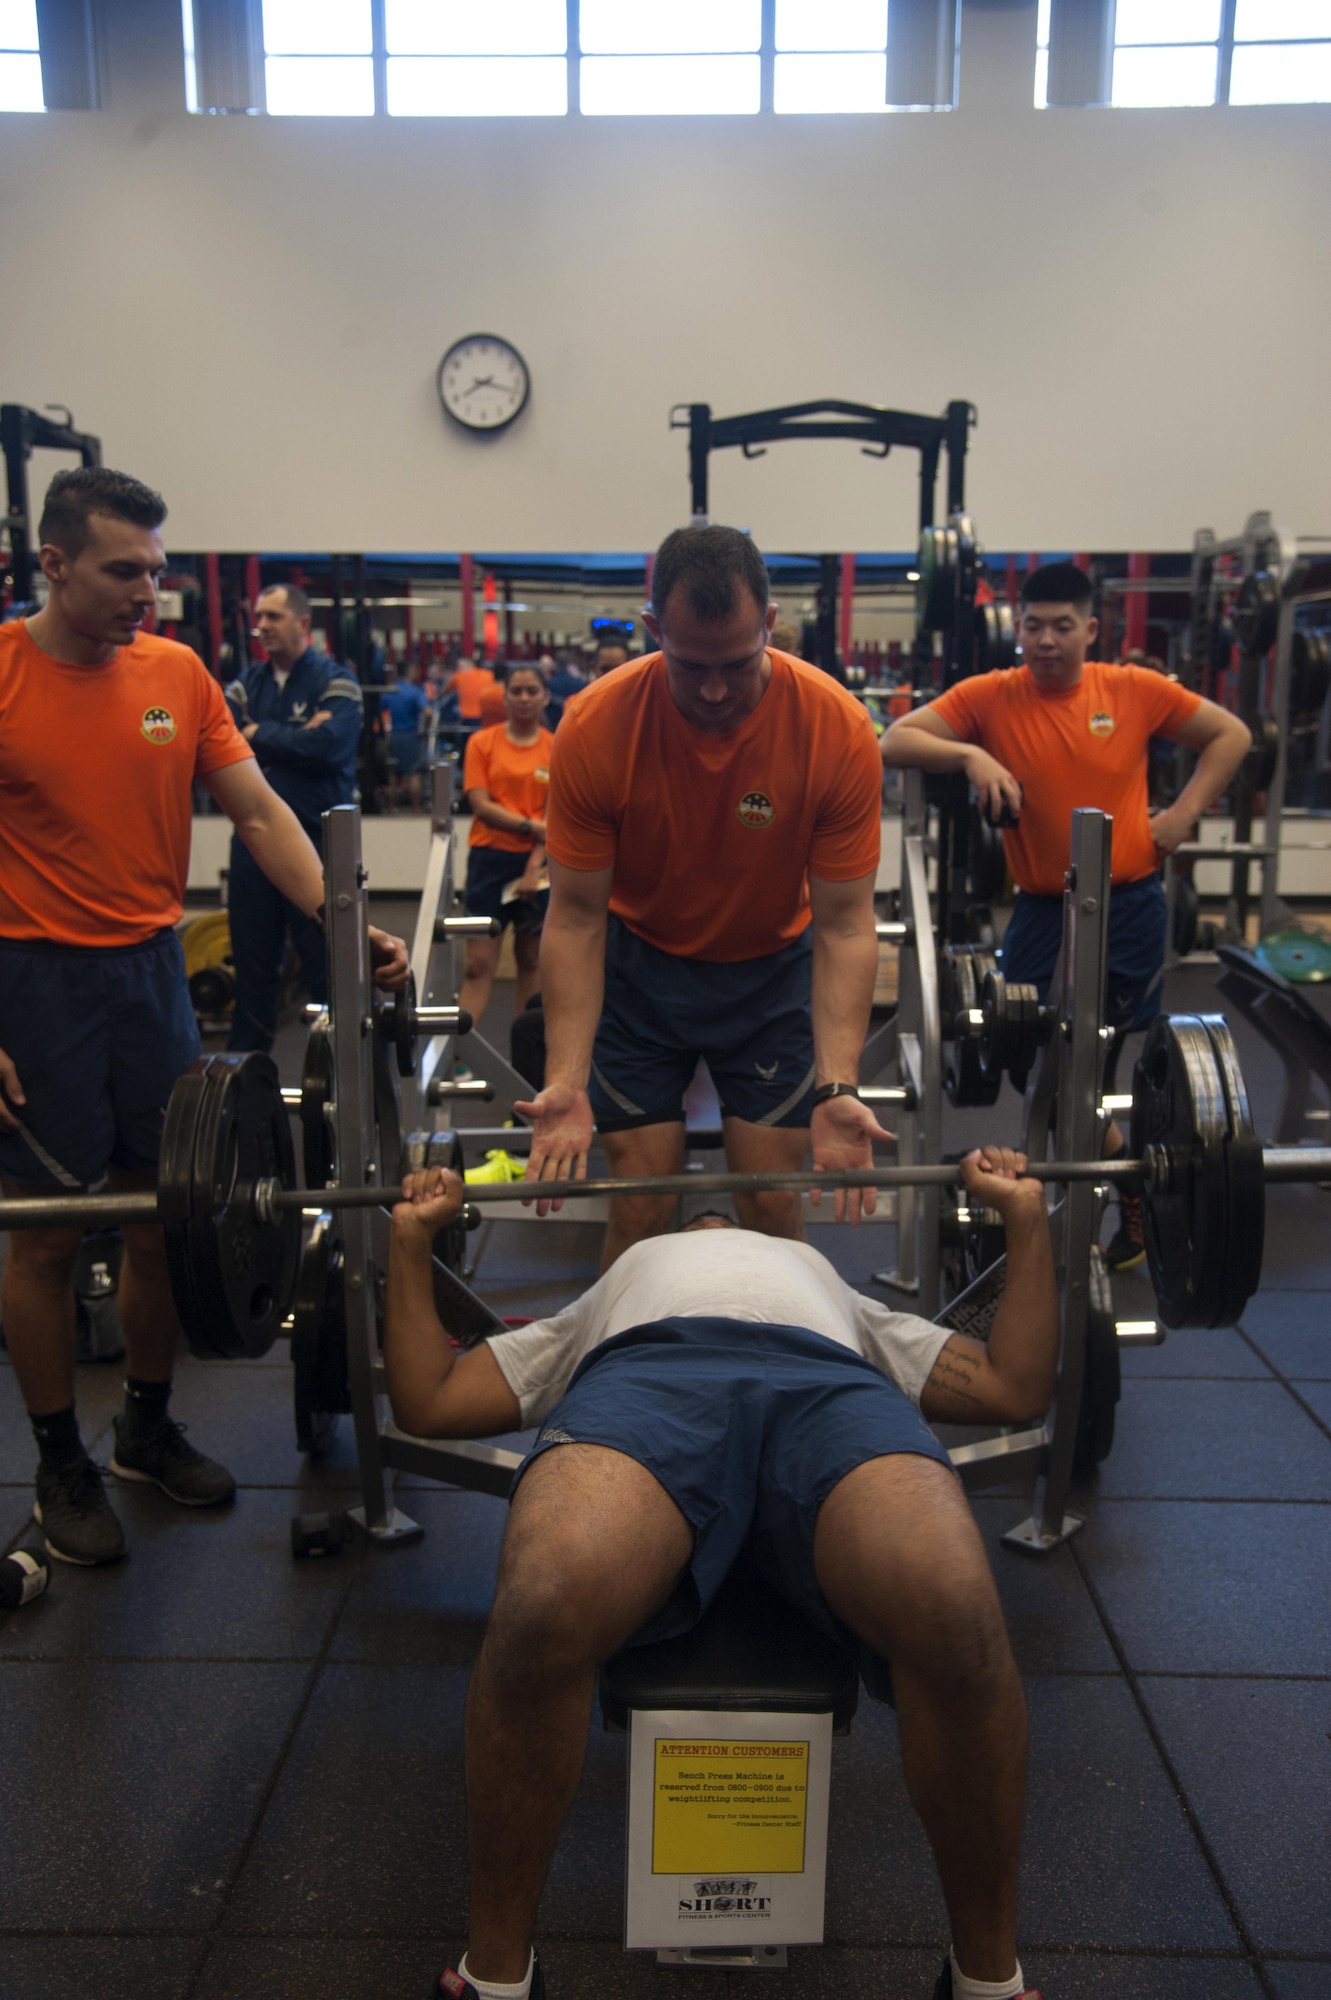 Members of Team MacDill spot an Airman during the weight-lifting portion of the 4th annual 5k and weight lifting competition to honor Maj. Raymond Estelle at MacDill Air Force Base, Fla., Jan. 13, 2017. During the event, participating members were allowed three attempts to see how much weight they could lift. (U.S. Air Force photo by Airman 1st Class Rito Smith) 